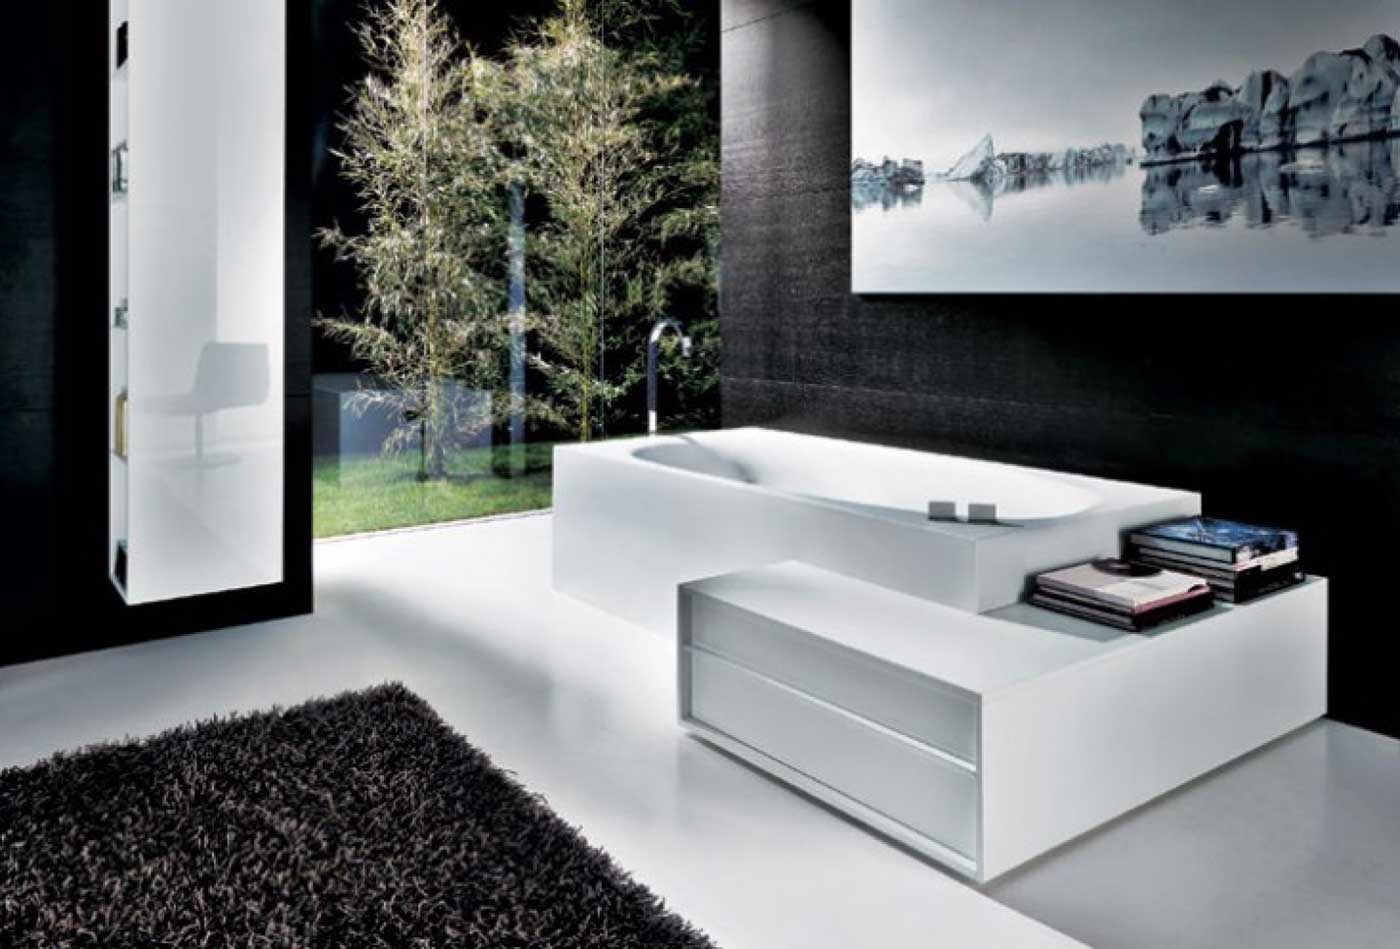 White And Schemed Elegance White And Black Color Schemed Bathrooms Decorating Ideas For Small Home With Remarkable White Bathtub Design And Unique Stainless Steel Faucet Designs Bathroom The Most Comfortable Bathroom Decorating Ideas